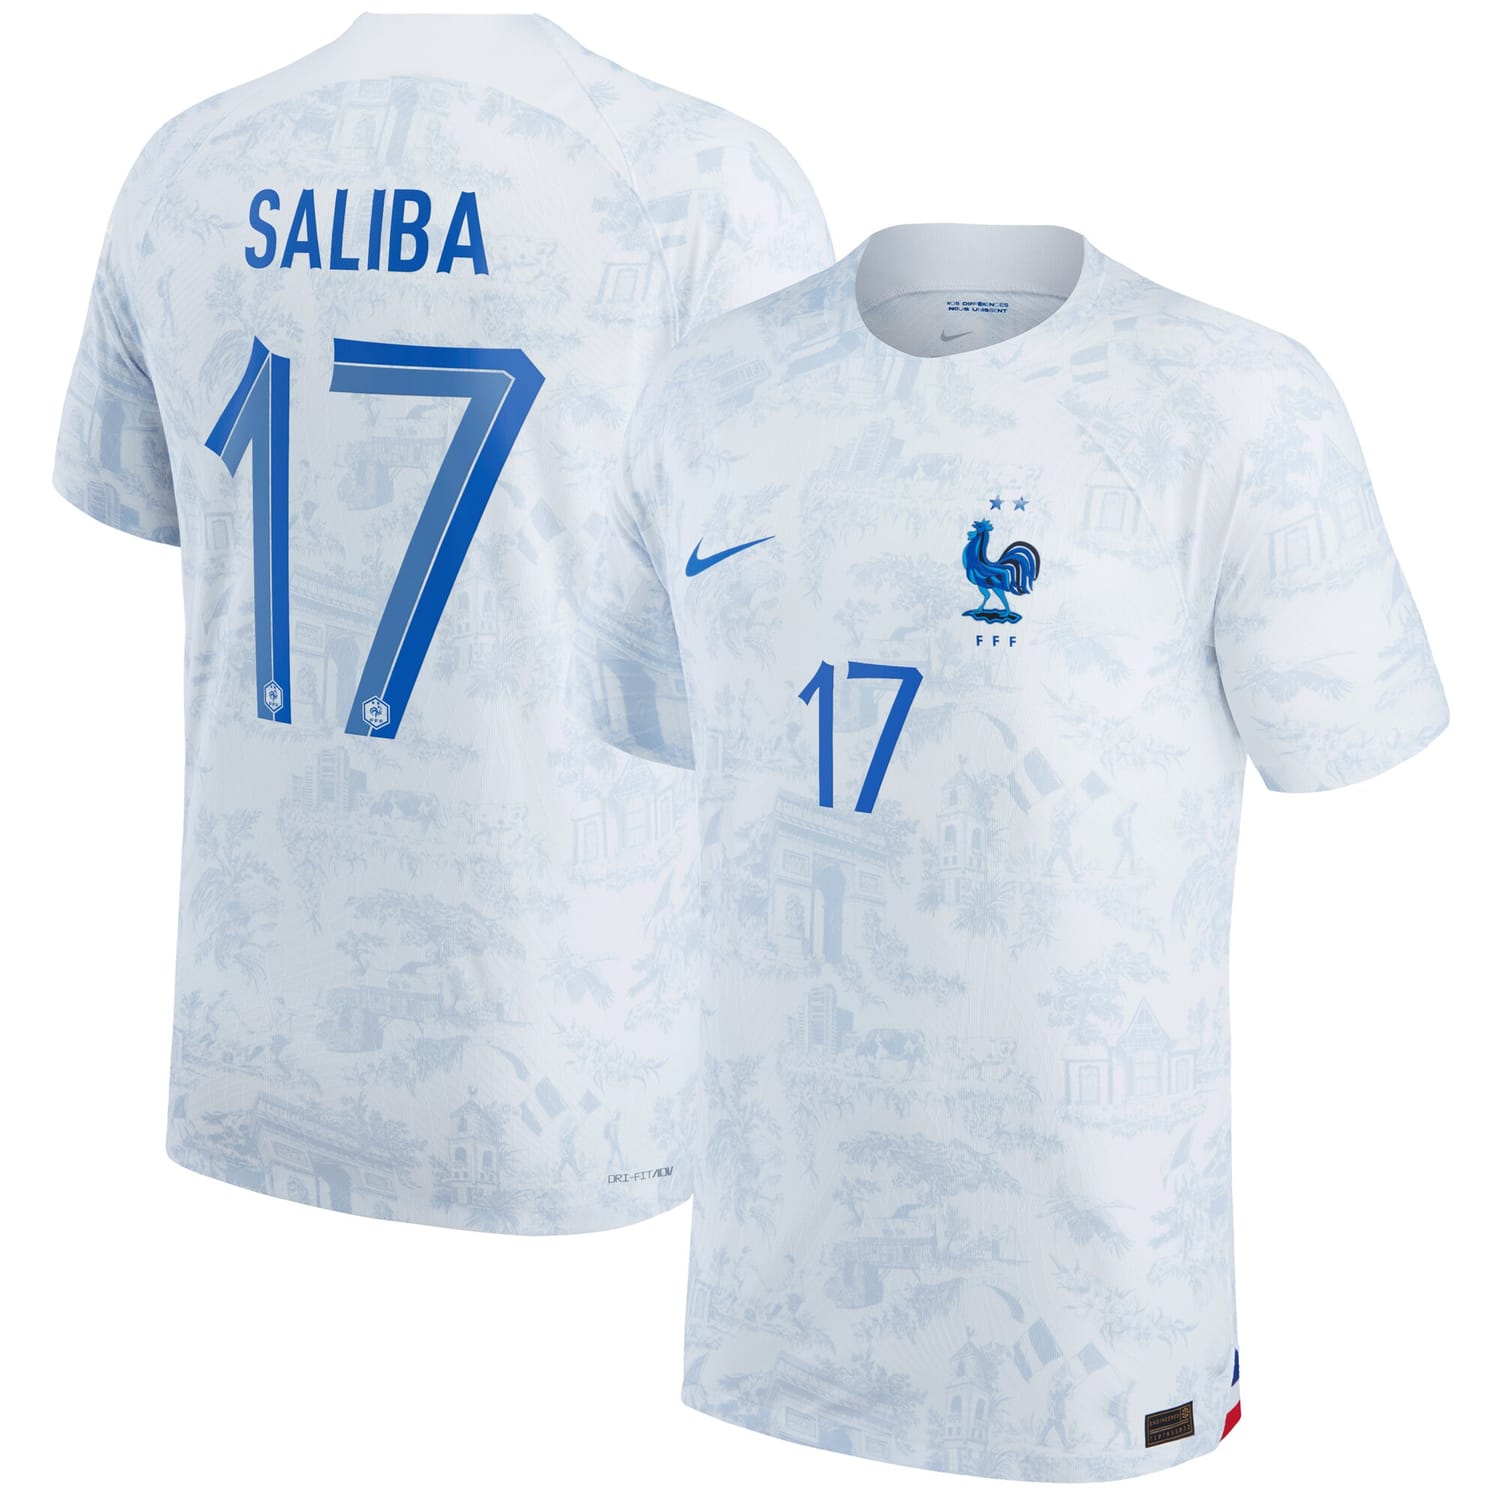 France National Team Away Authentic Jersey Shirt 2022 player William Saliba 17 printing for Men